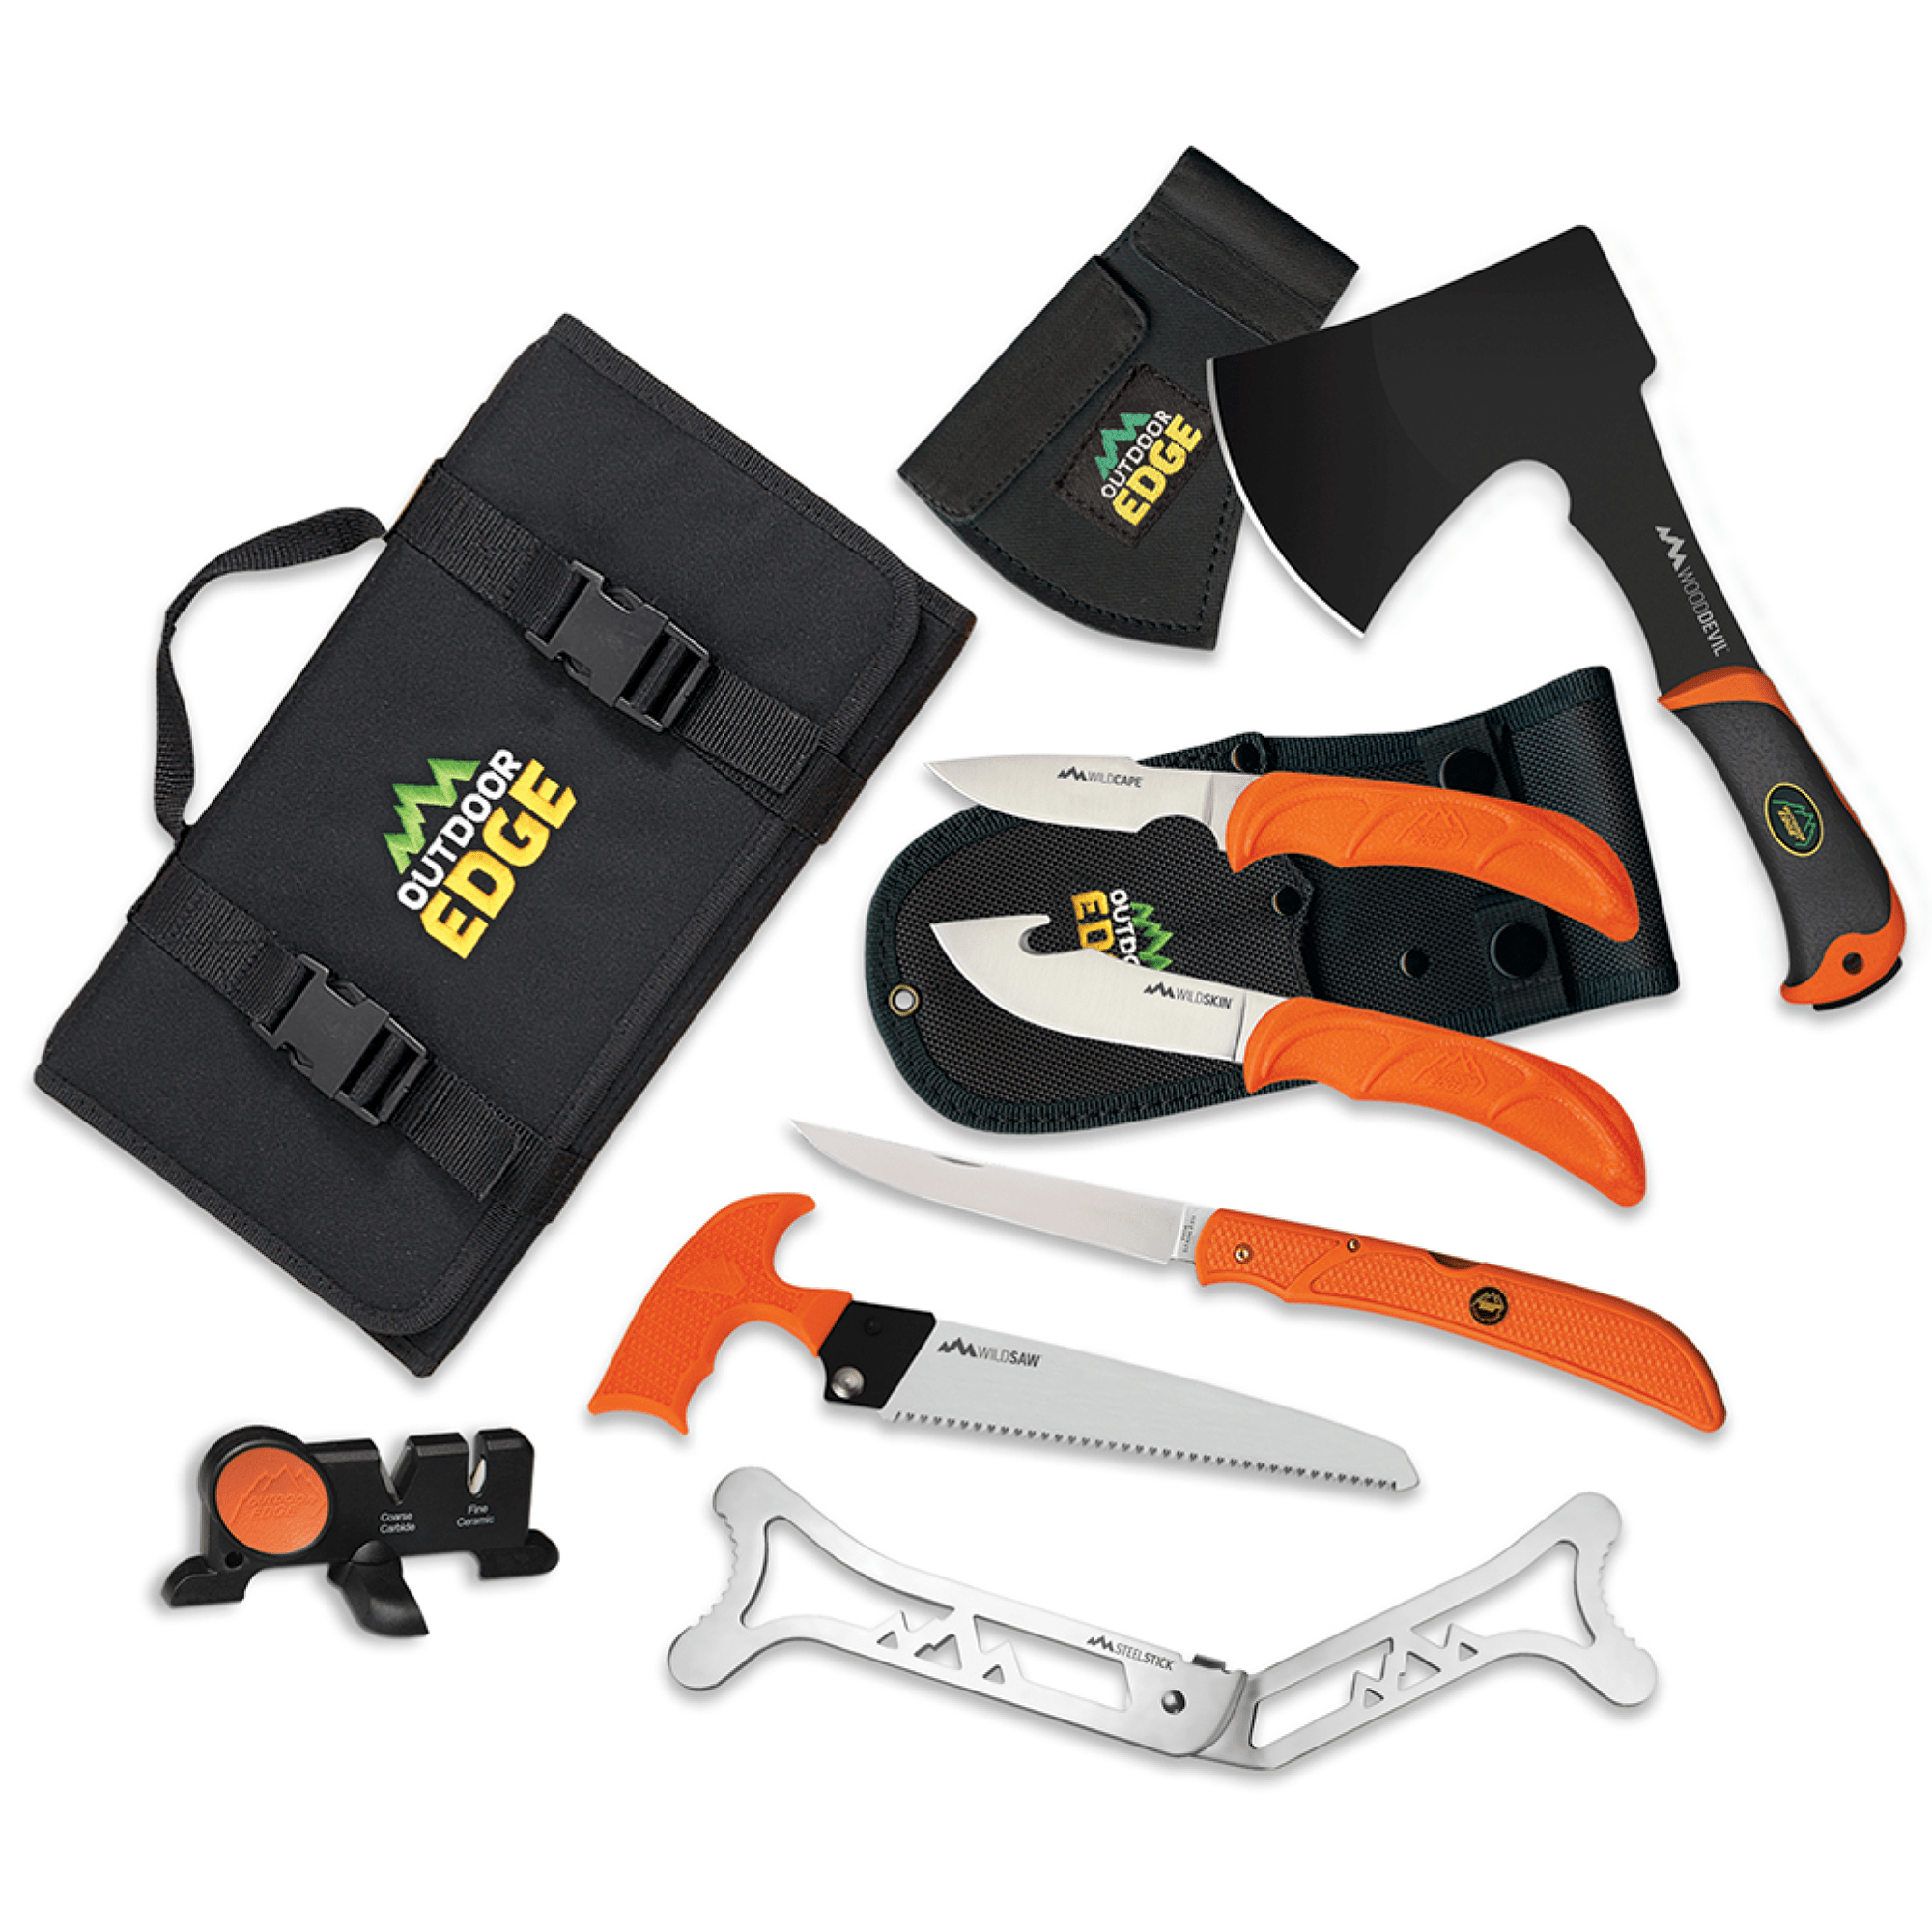 Outfitter™, Complete Field Dressing and Home Processing Set for Hunting